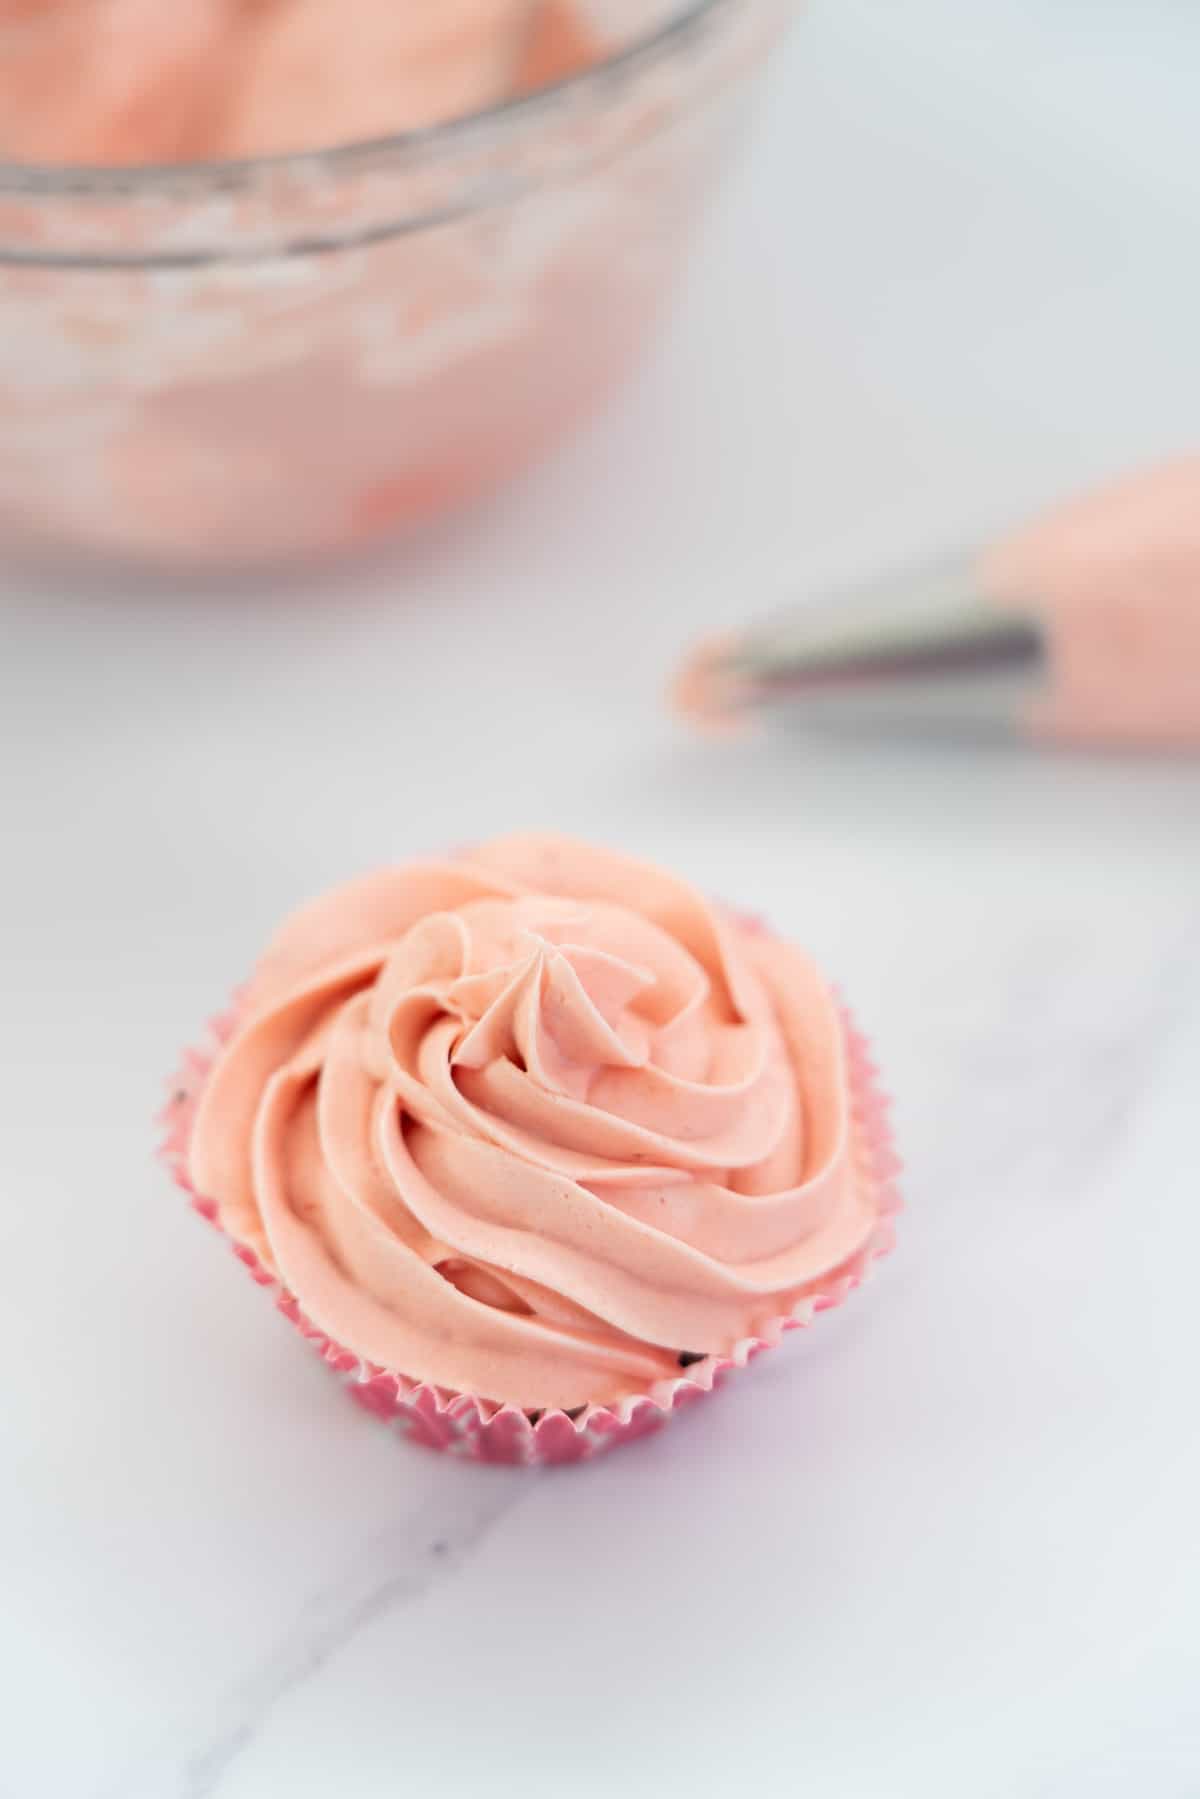 cupcake frosted with pink strawberry buttercream